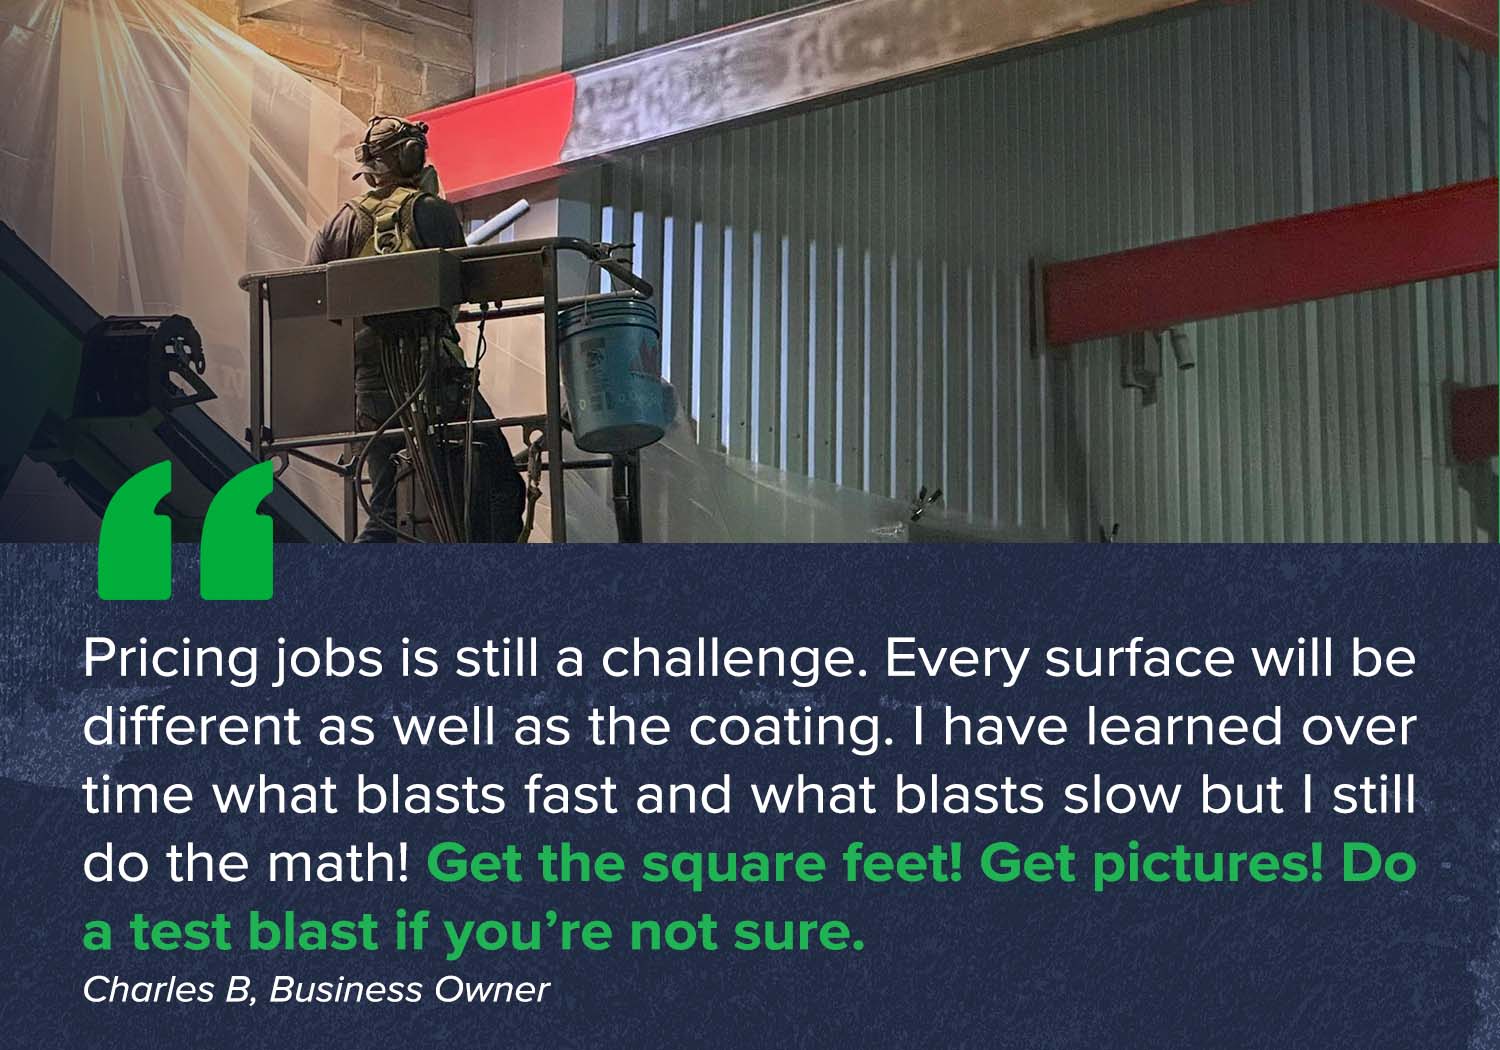 "Pricing jobs is still a challenge. Every surface will be different as well as the coating. I have learned over time what blasts fast and what blasts slow but I still do the math! Get the square feet! Get pictures! Do a test blast if you’re not sure."